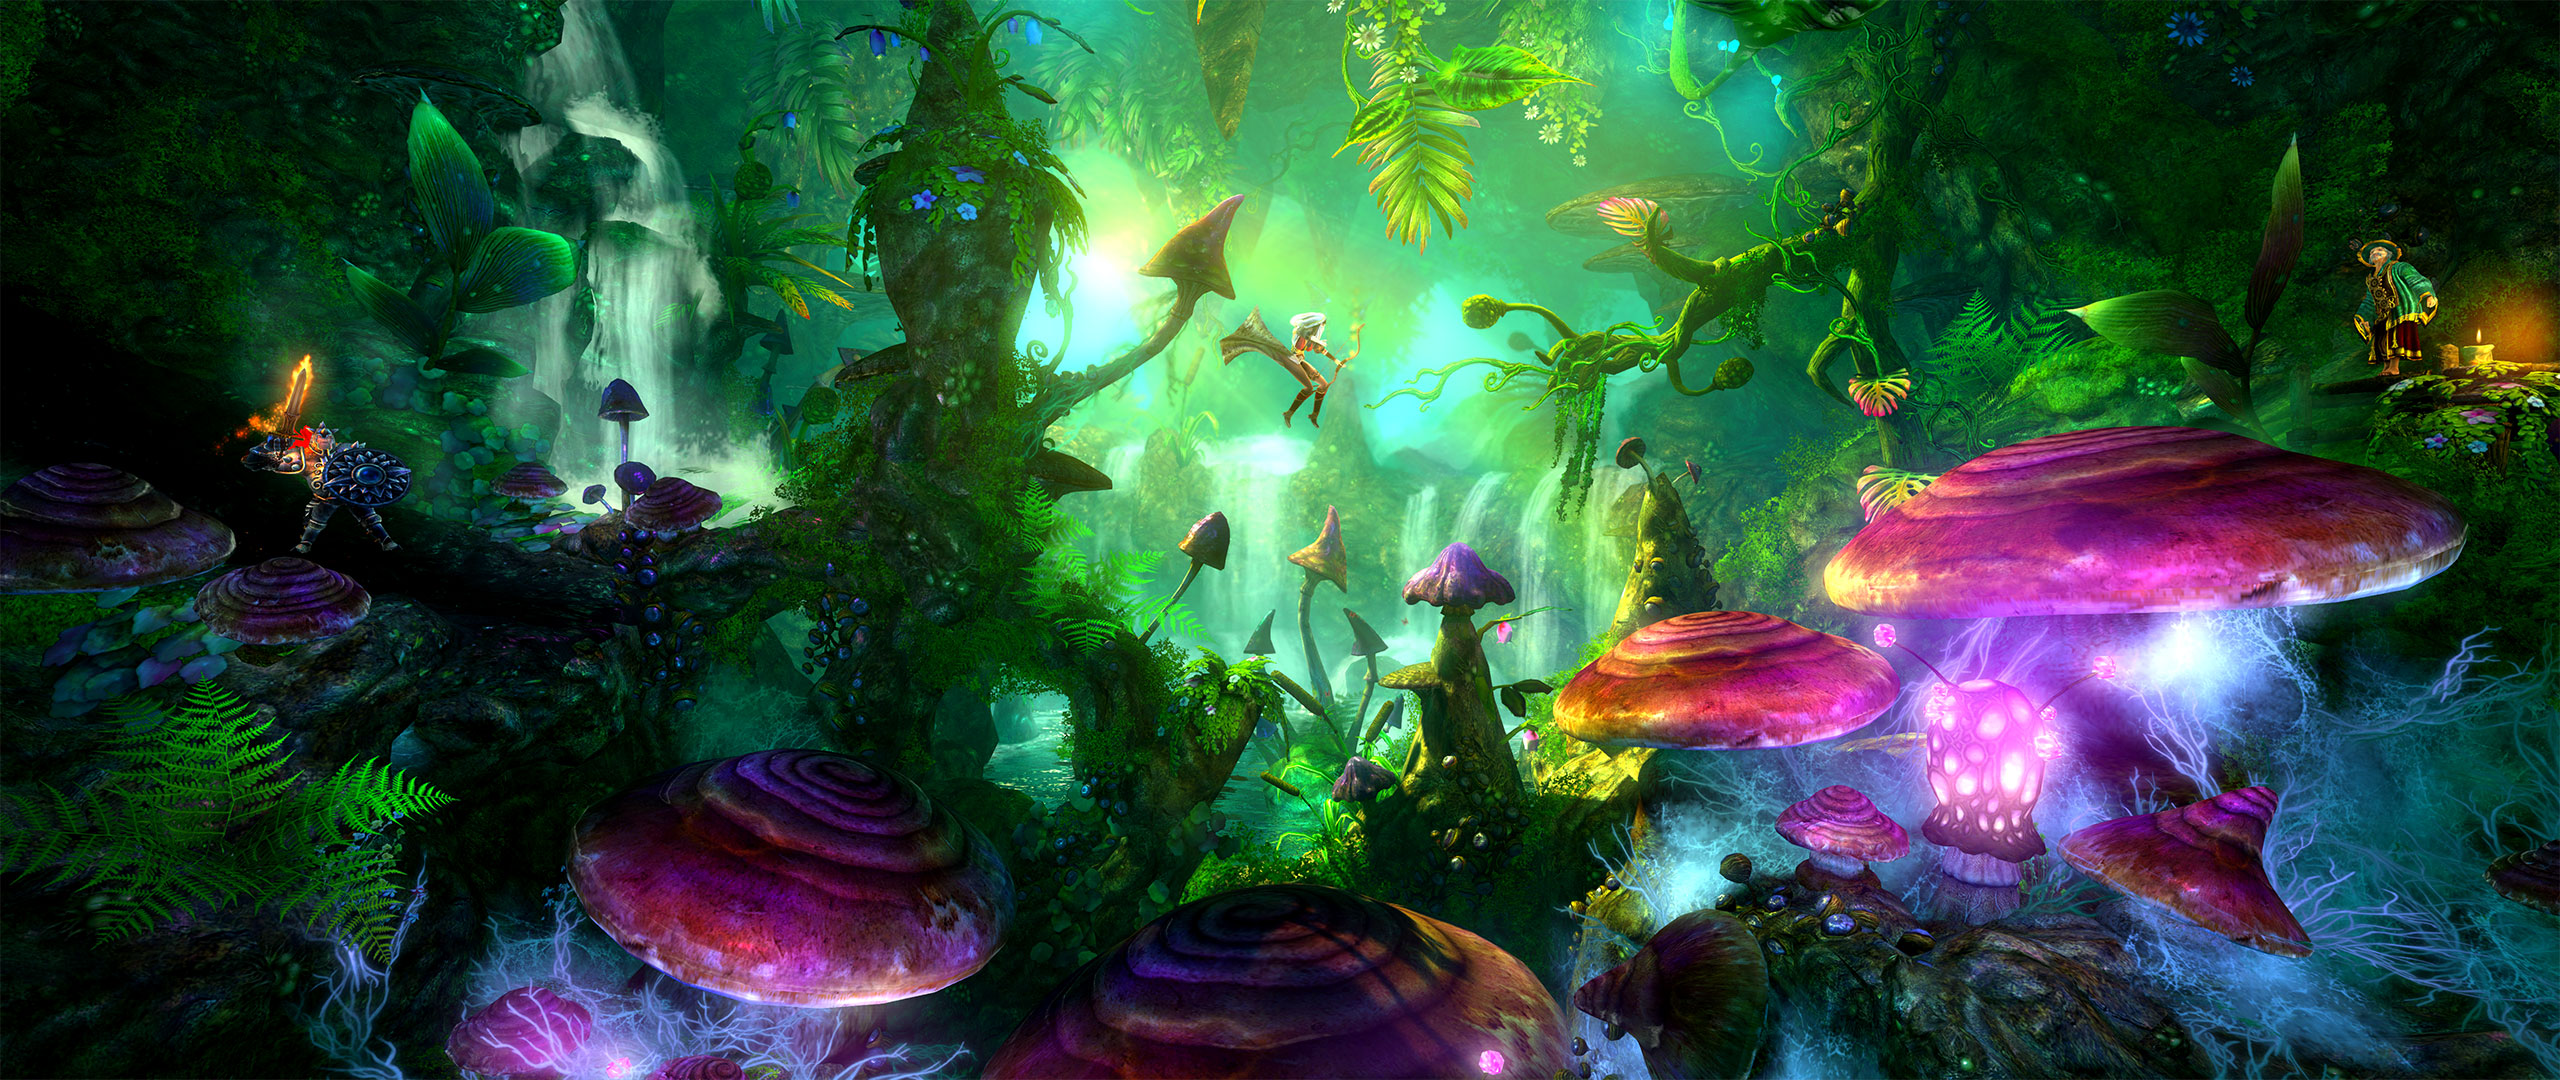 Amazing Trine Pictures & Backgrounds